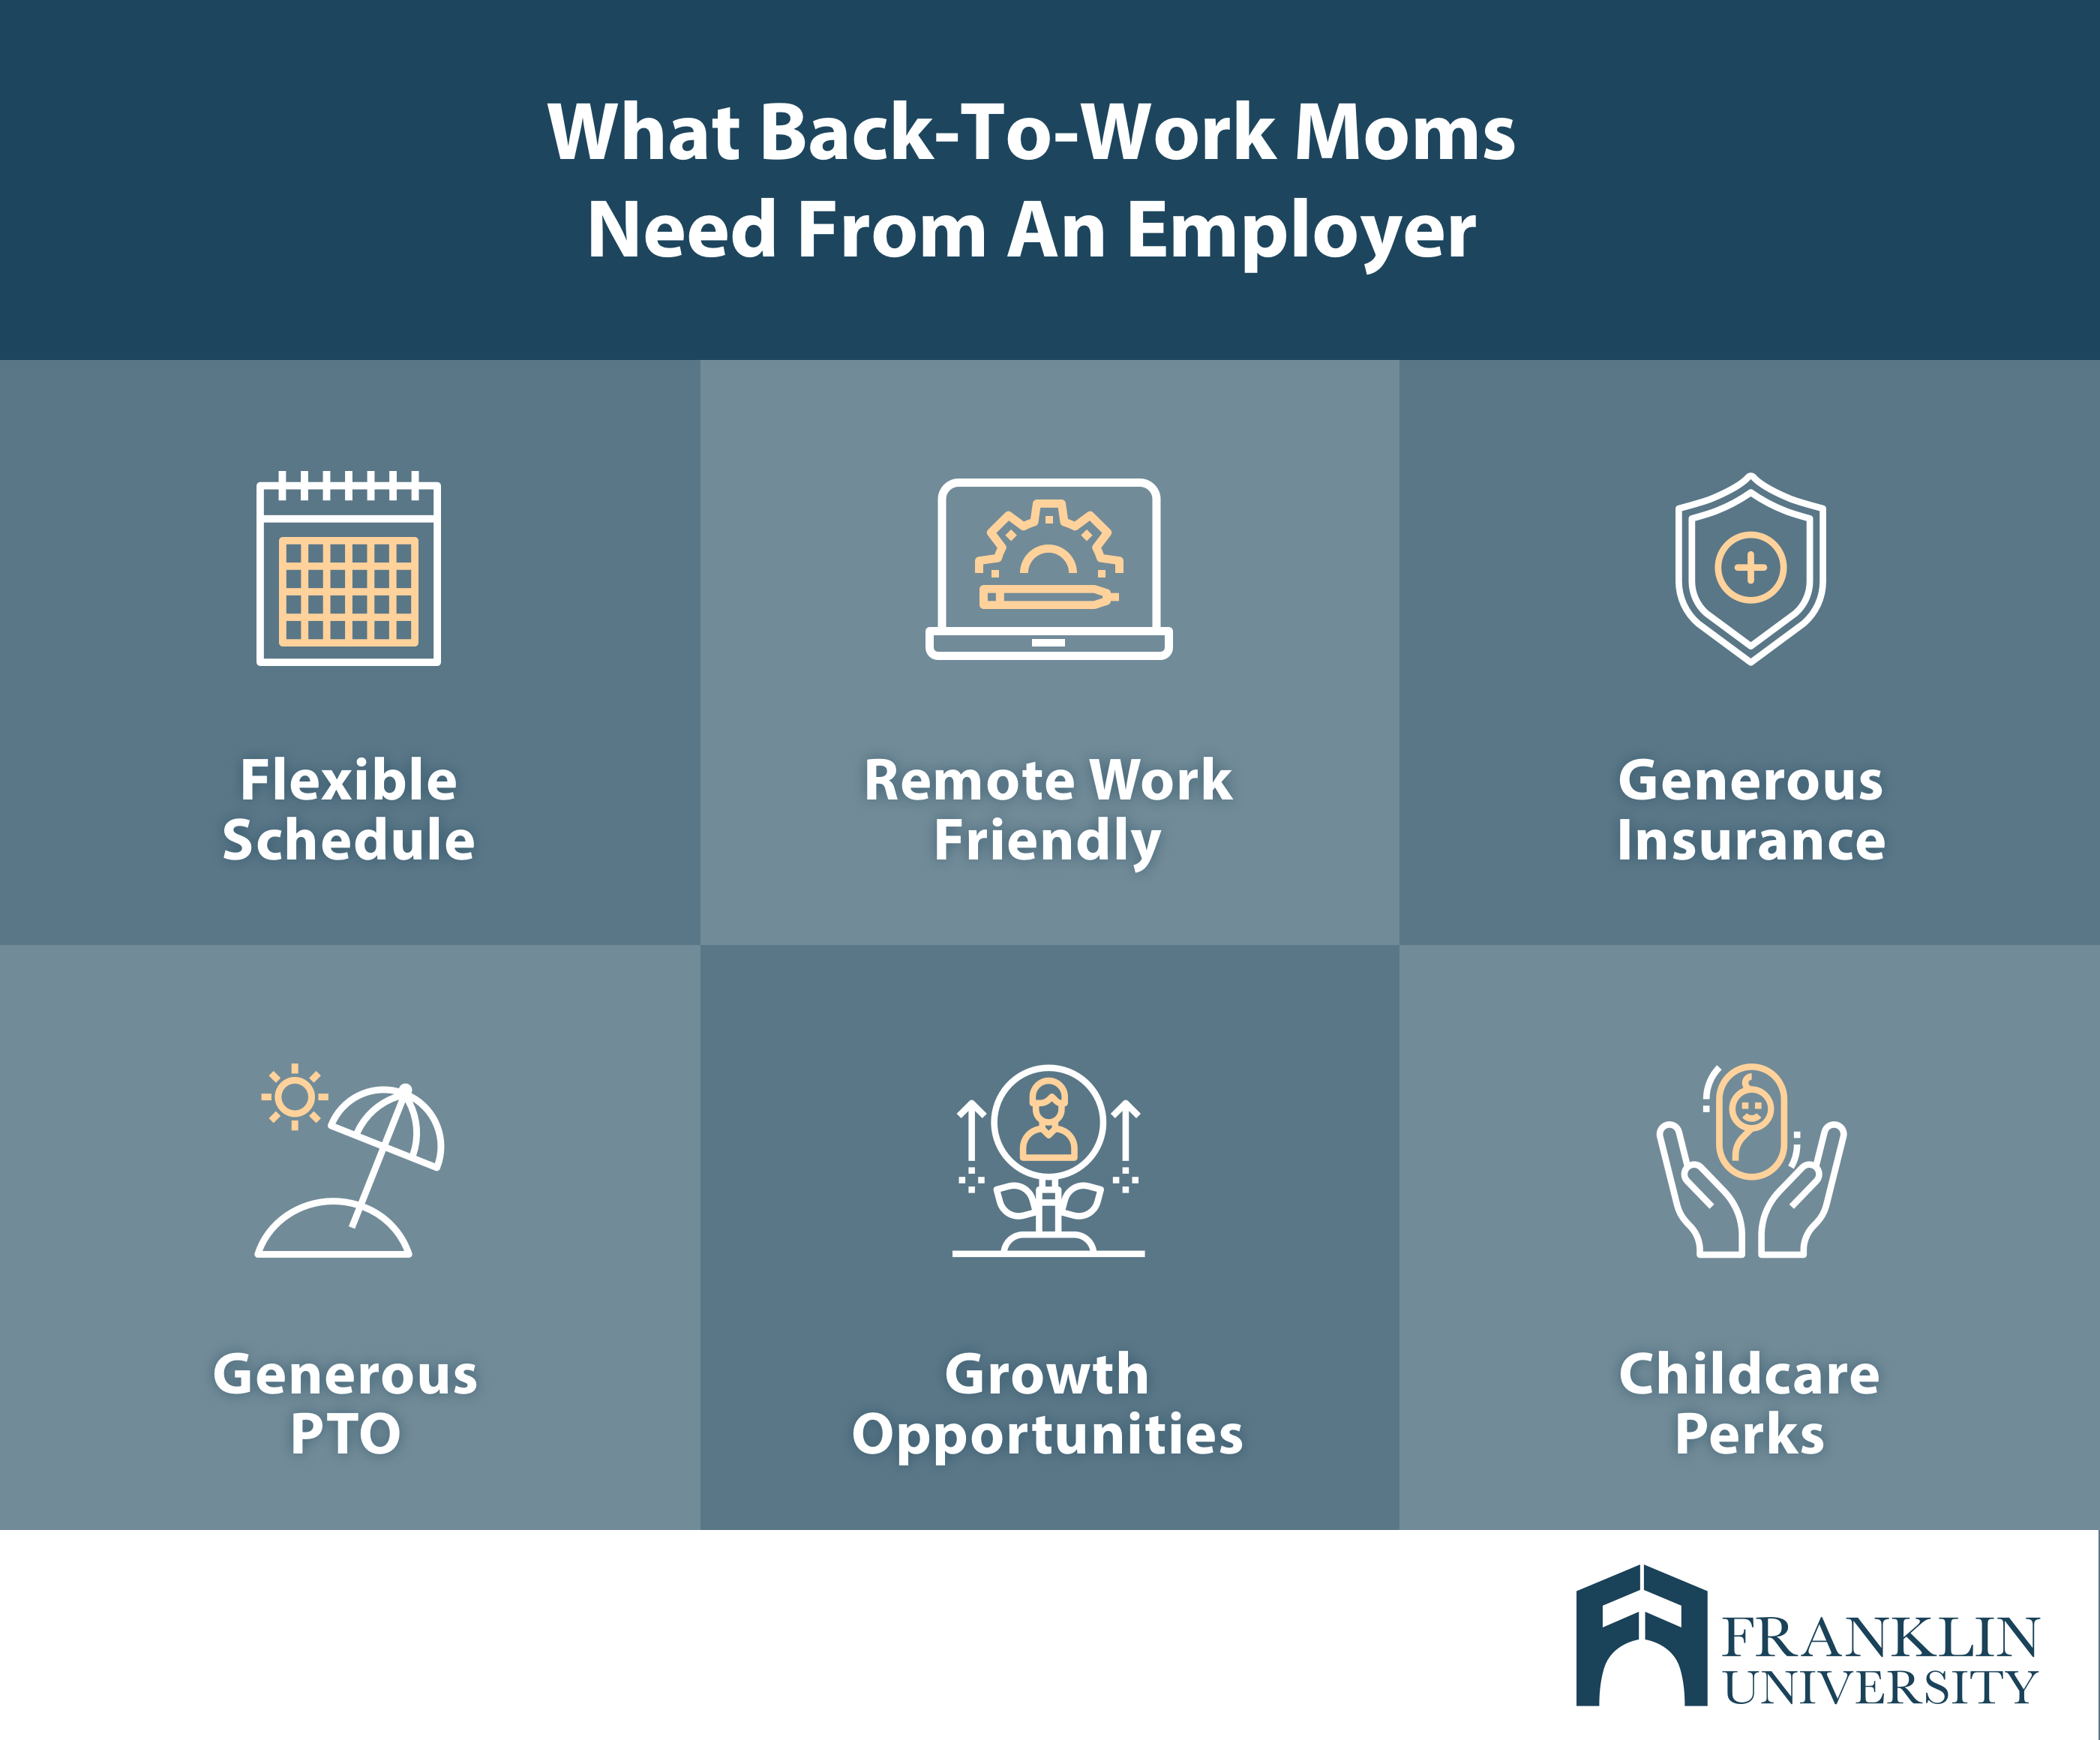 20 High-Growth, Flexible Jobs For Working Millennial Mothers